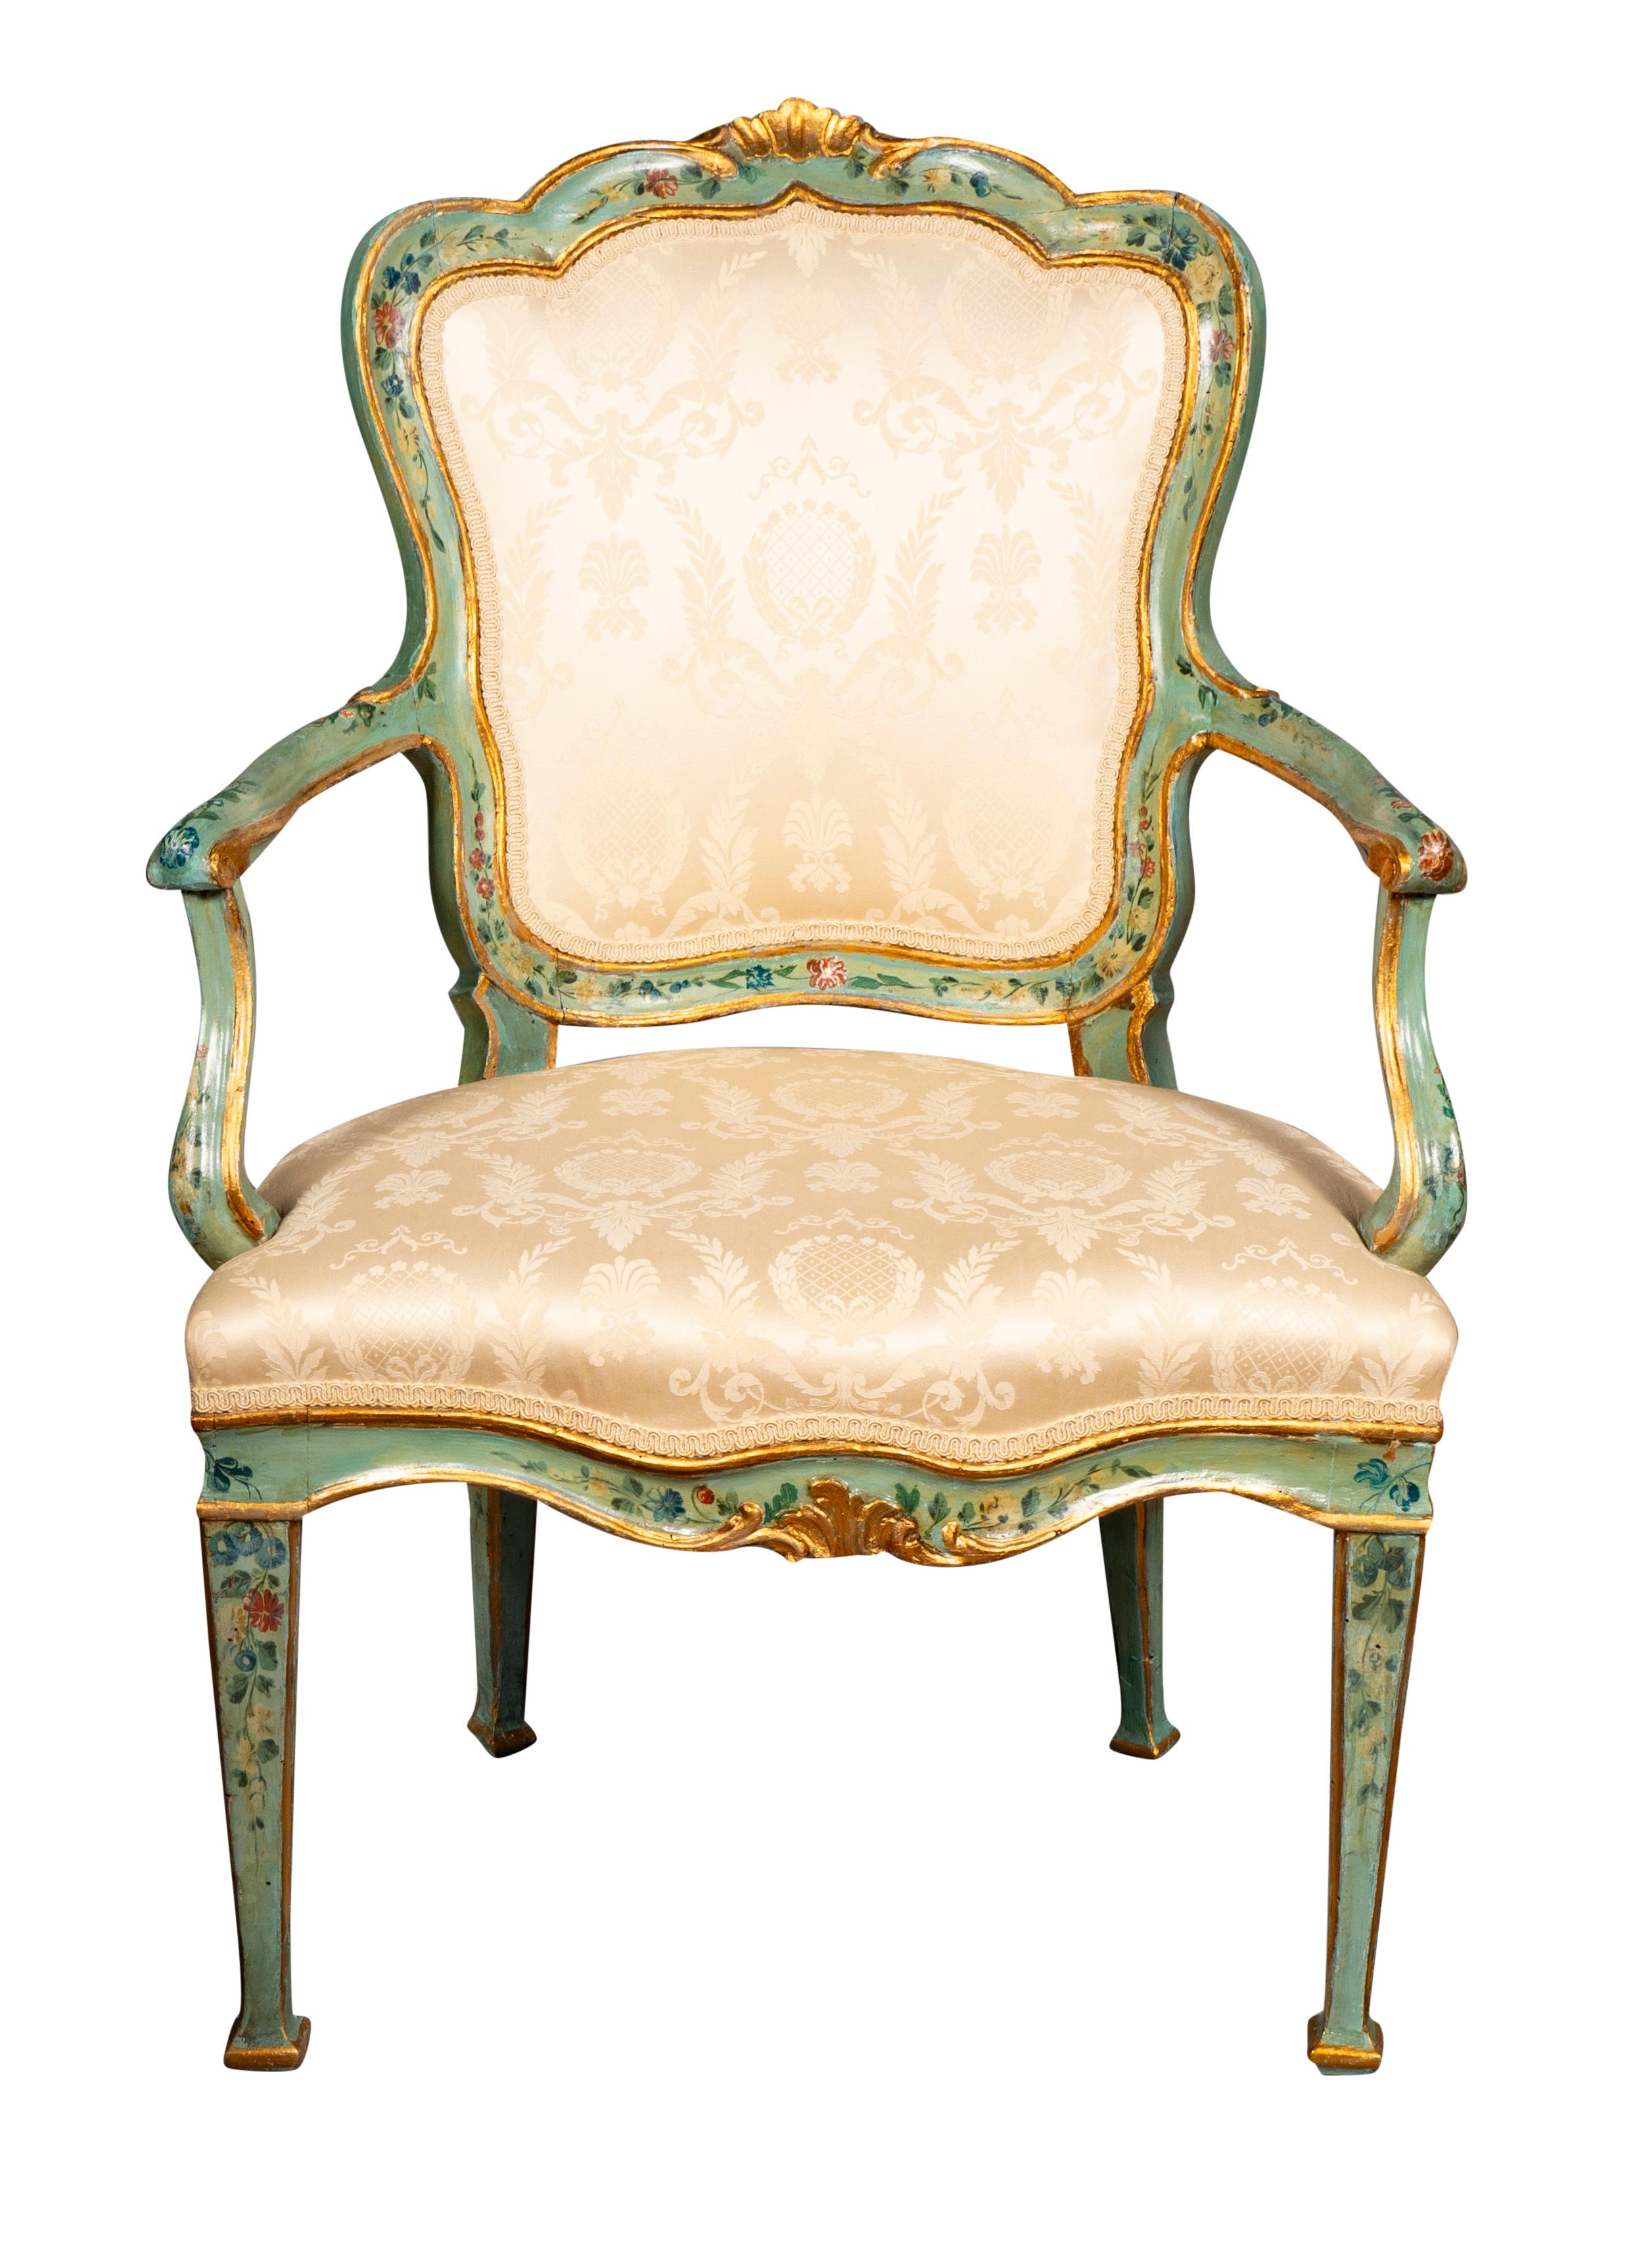 Neoclassical Pair Of Eighteenth Century Venetian Painted Armchairs For Sale